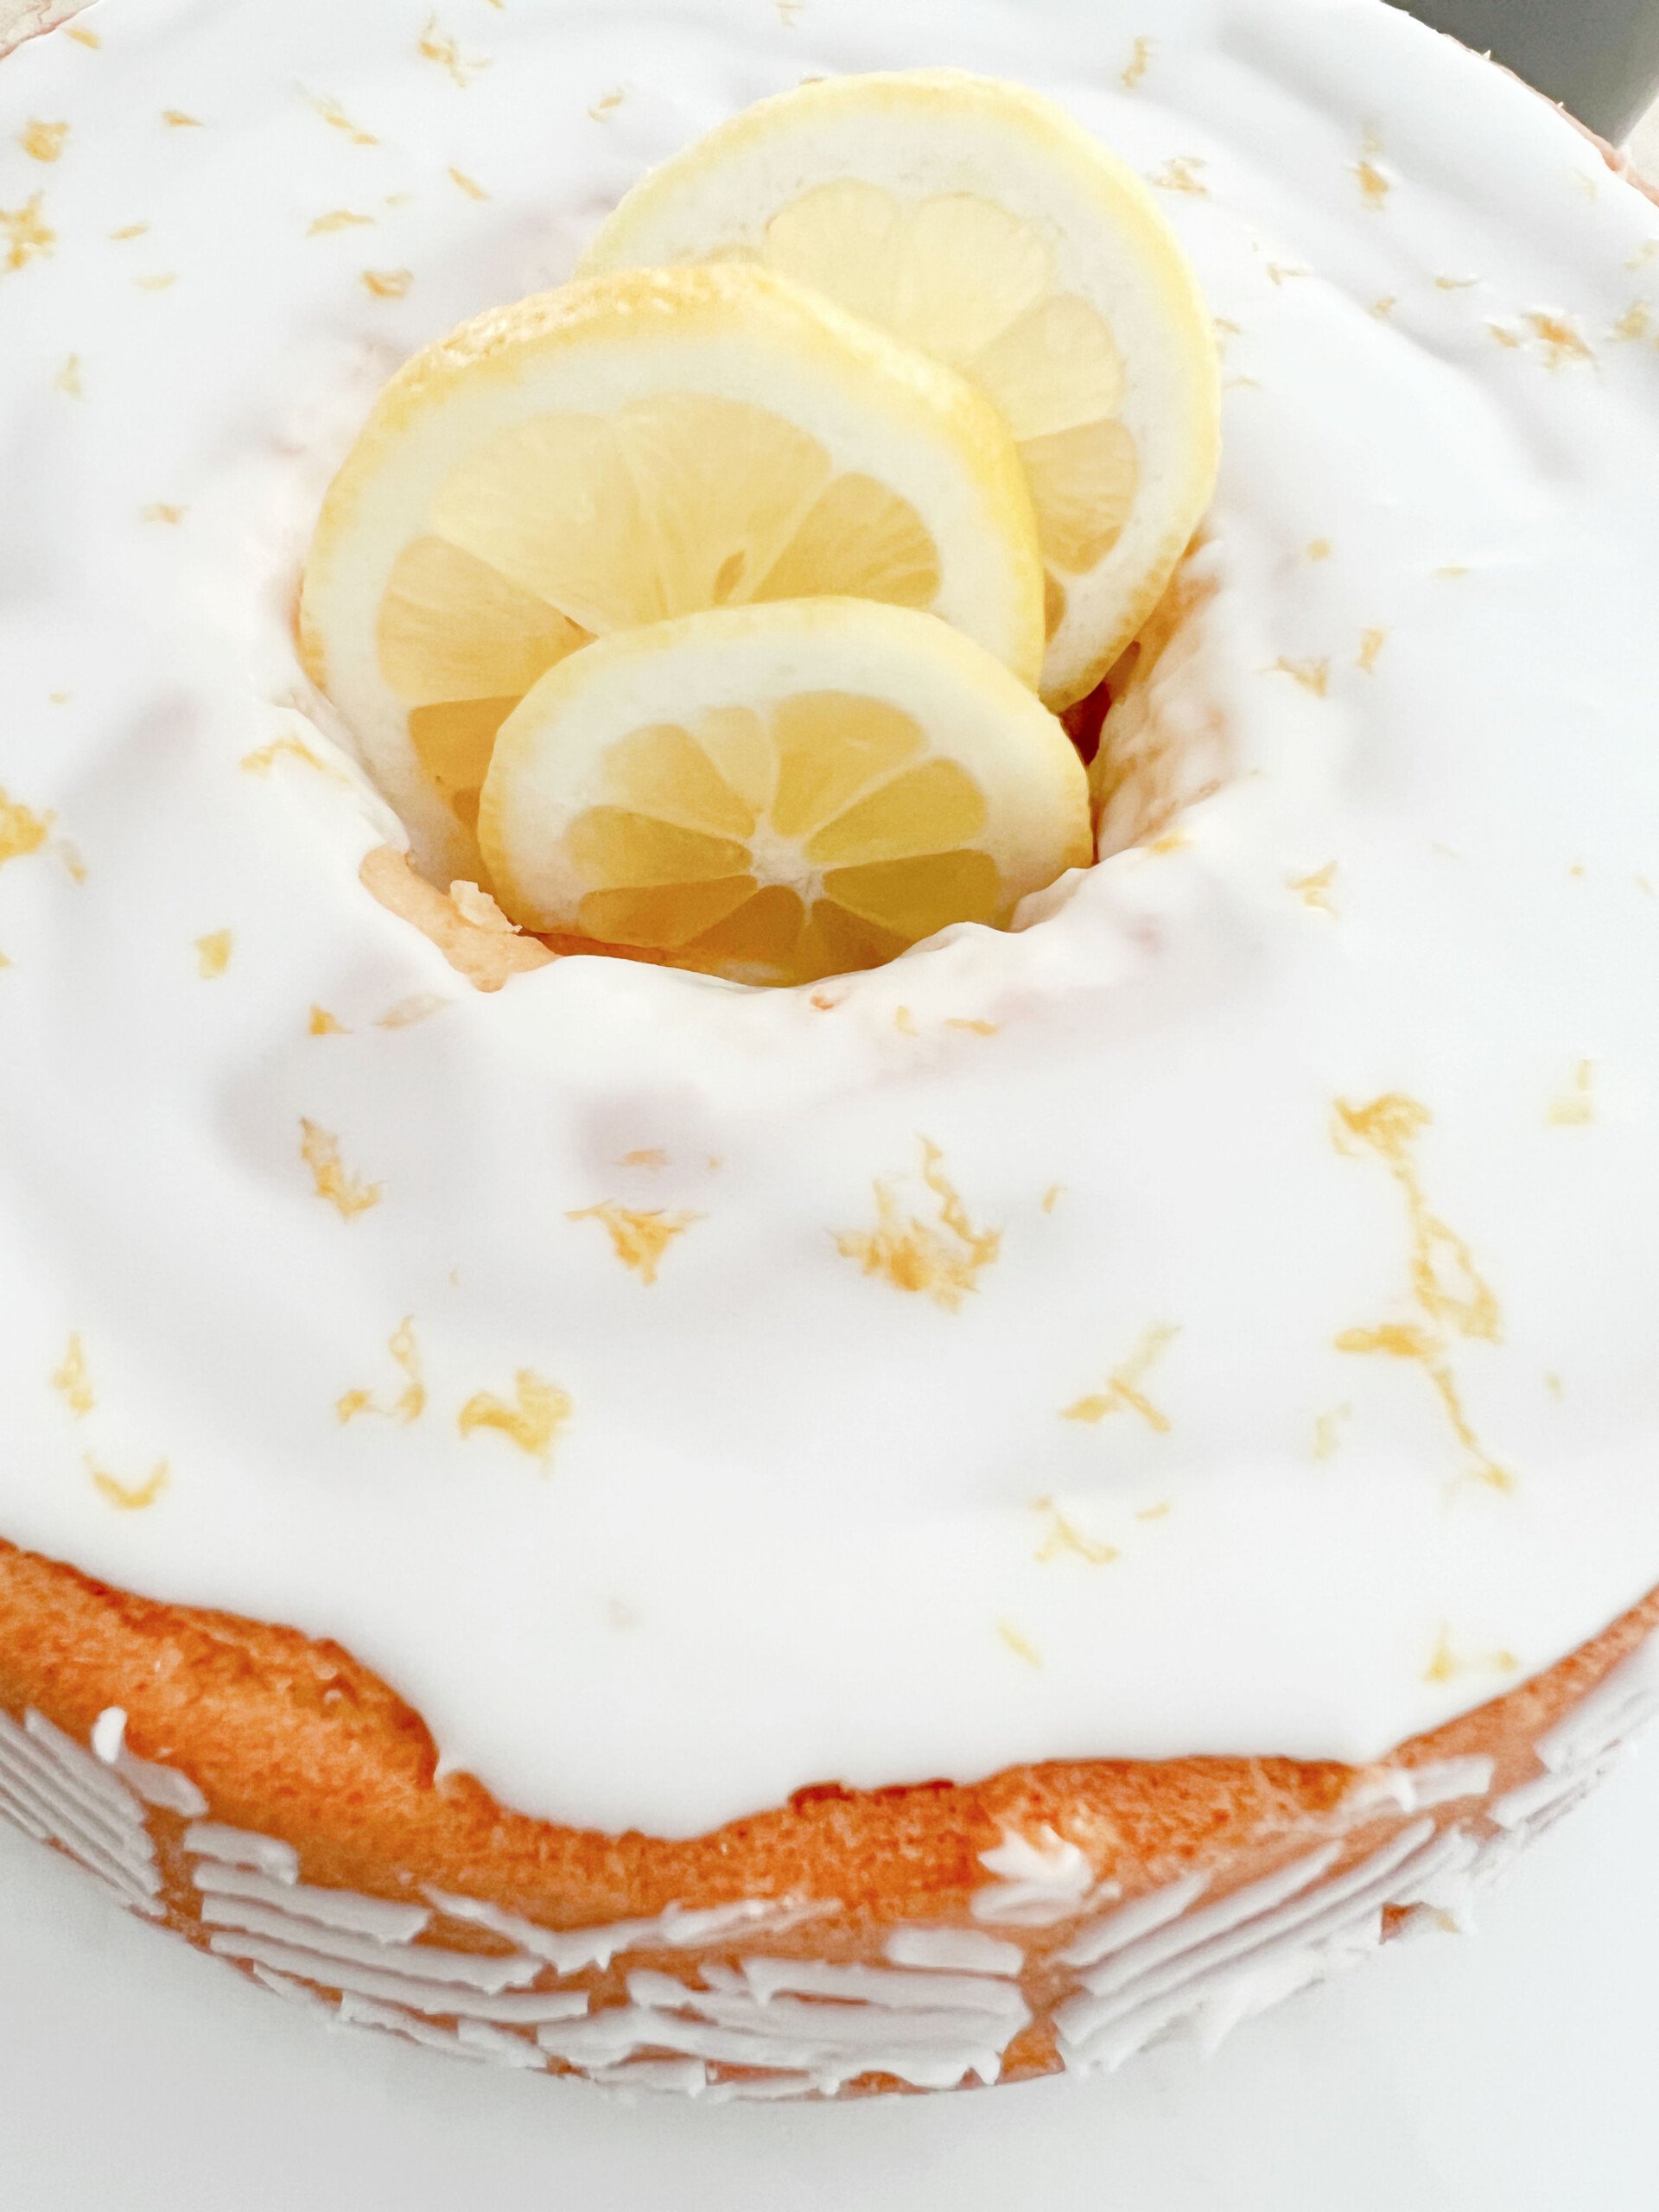 Top view of the Lemon Pound Cake, with lemon slices in the center.